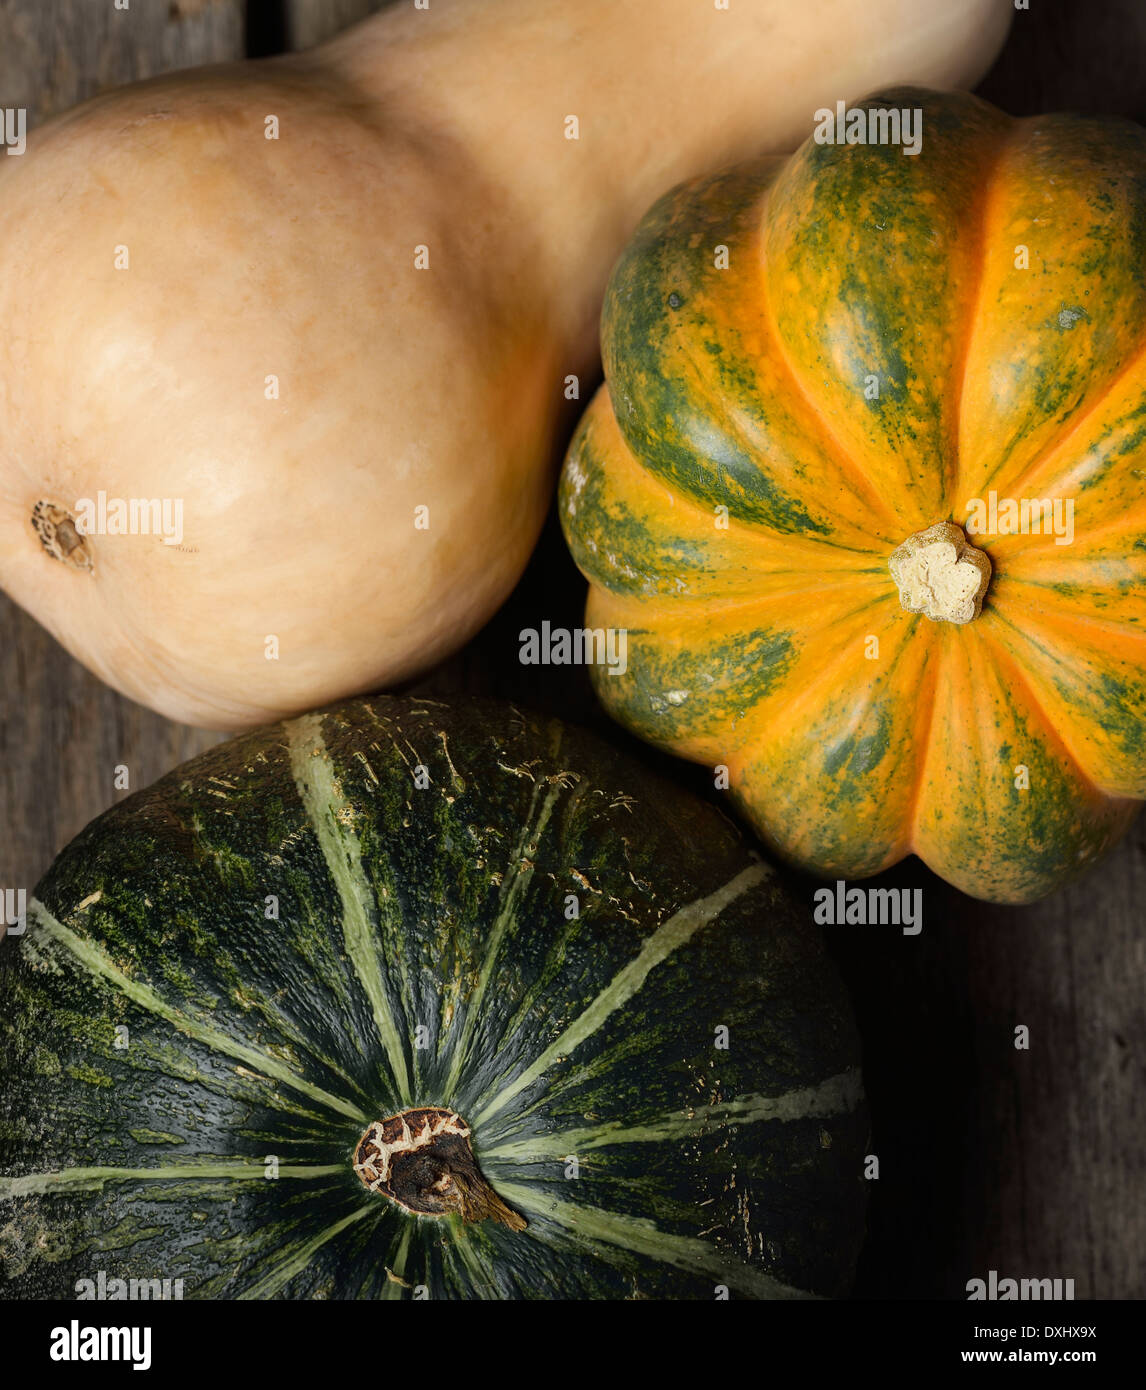 Squash Collection,Top View Stock Photo